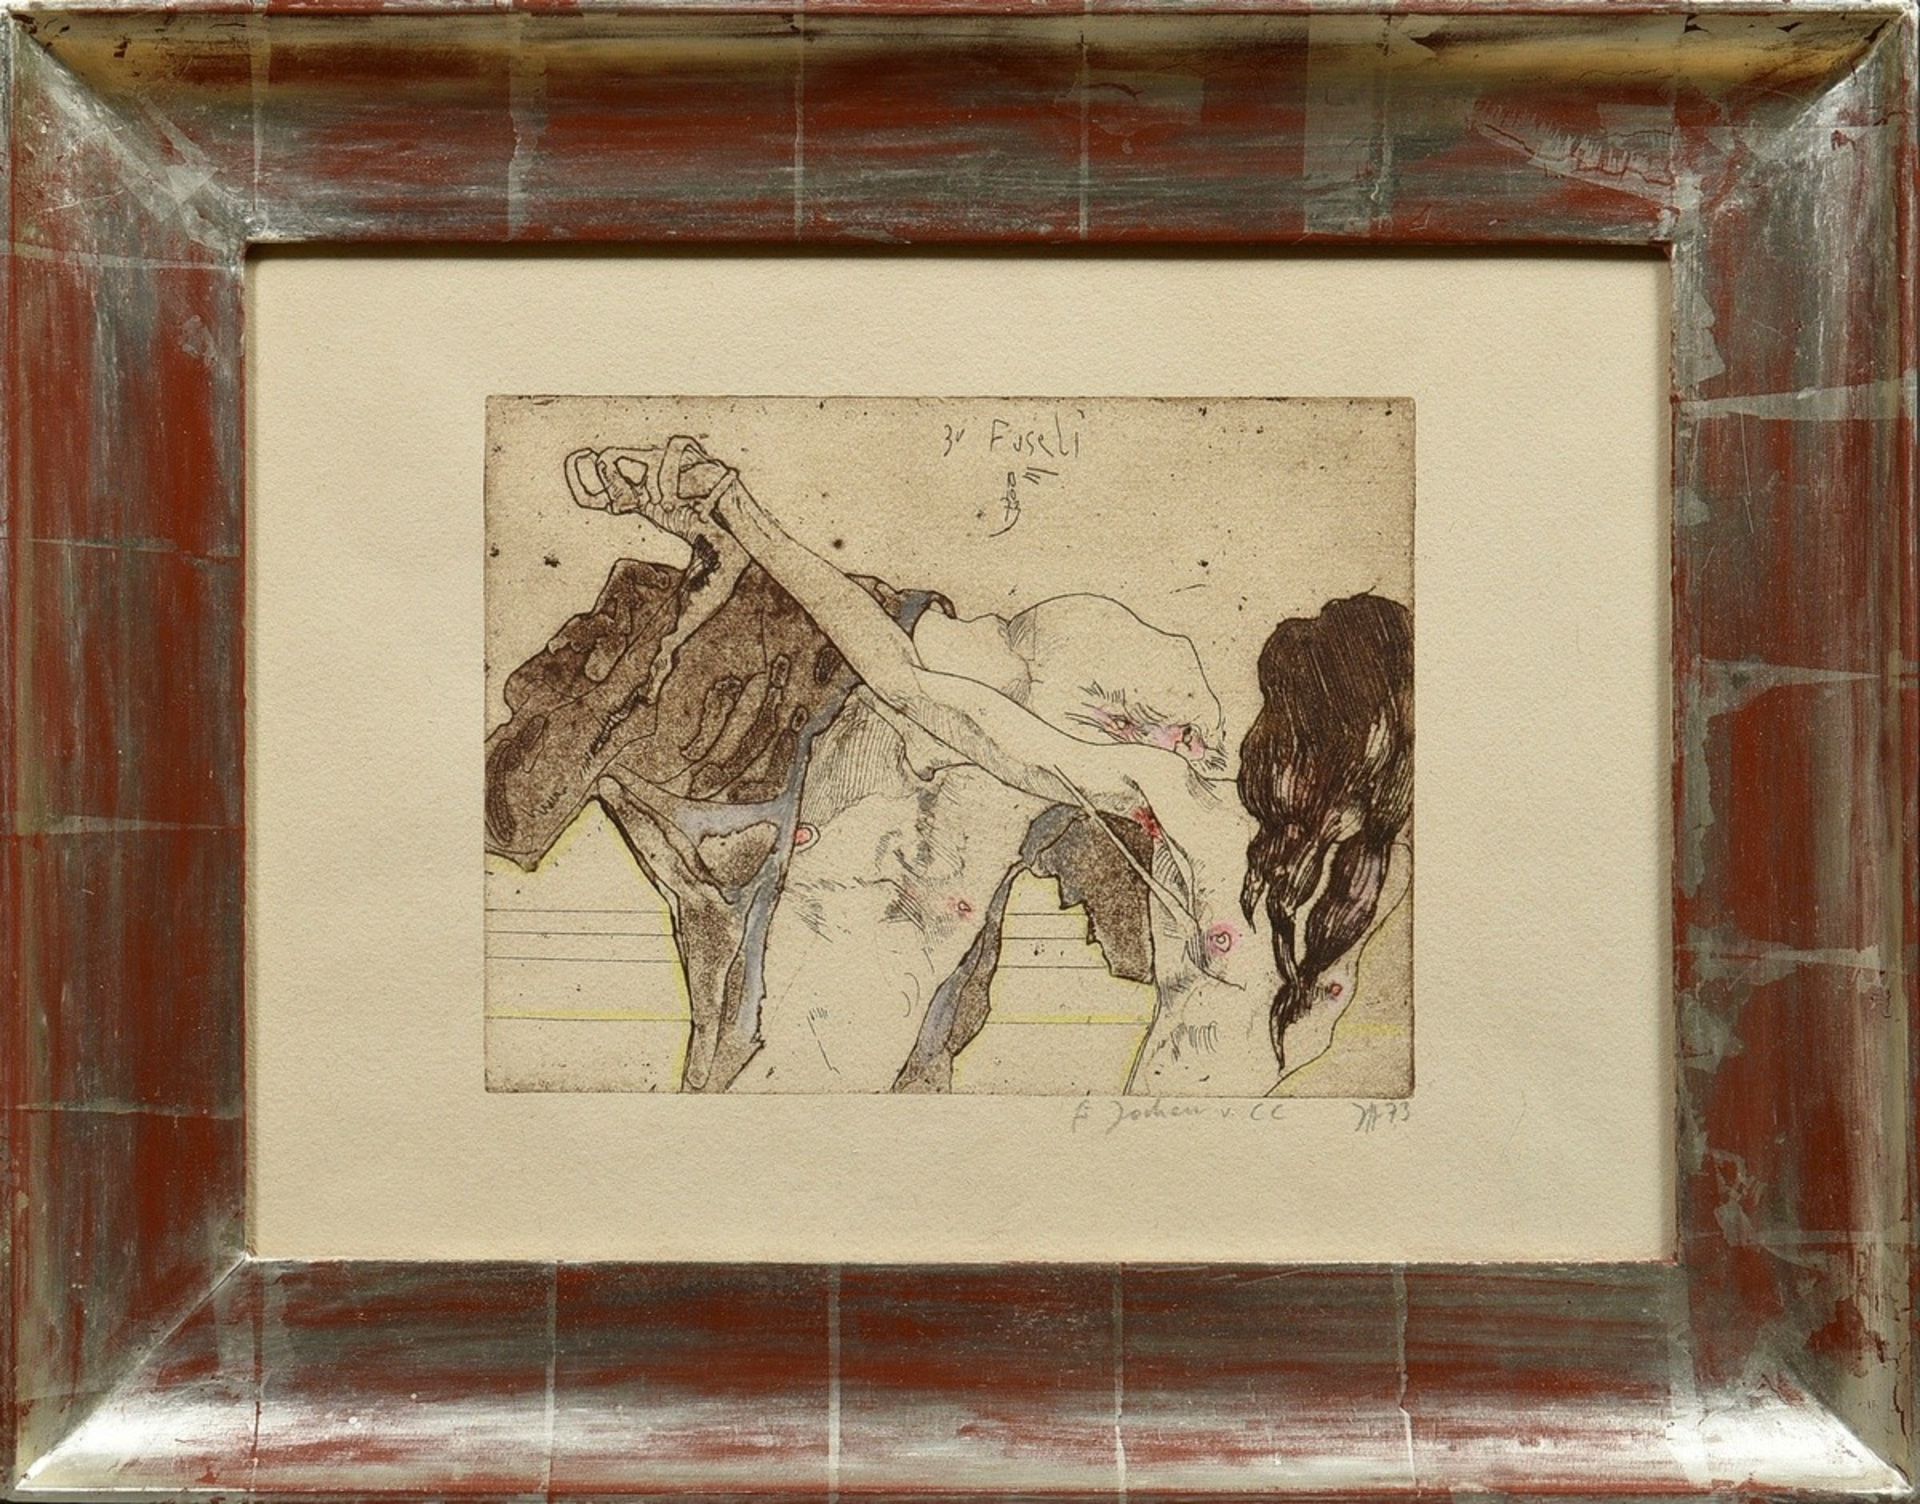 Janssen, Horst (1929-1995) "Zu Fuseli" 1973, etching, hand-coloured with coloured pencils, sign./da - Image 2 of 3